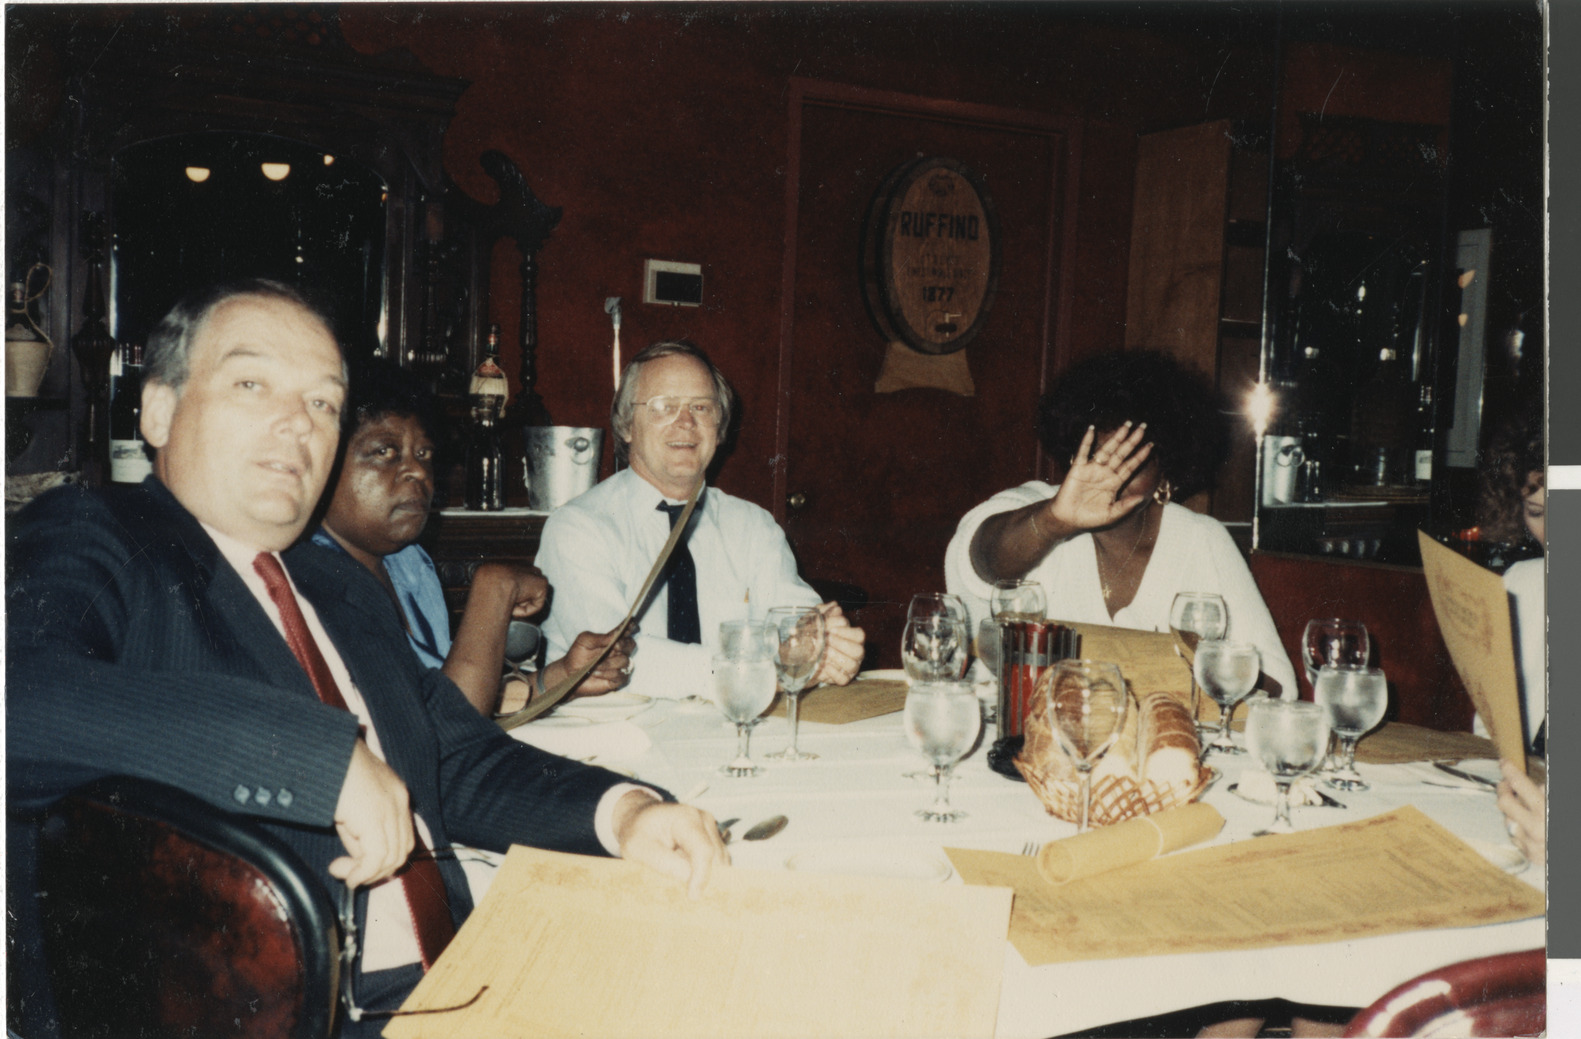 Dinner party, Image 01